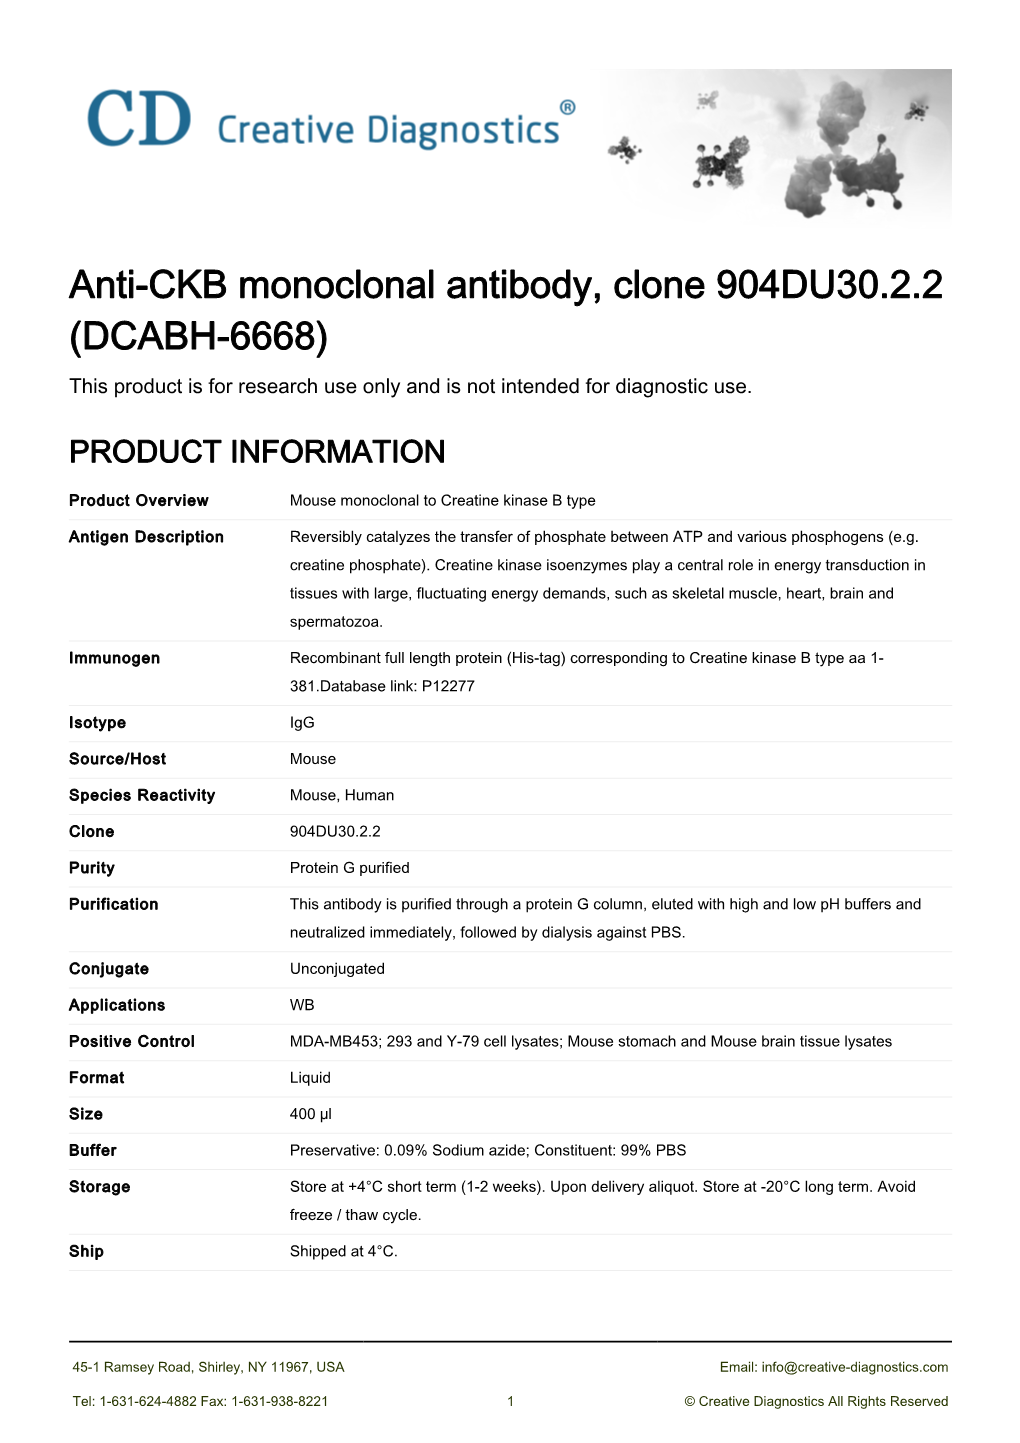 Anti-CKB Monoclonal Antibody, Clone 904DU30.2.2 (DCABH-6668) This Product Is for Research Use Only and Is Not Intended for Diagnostic Use